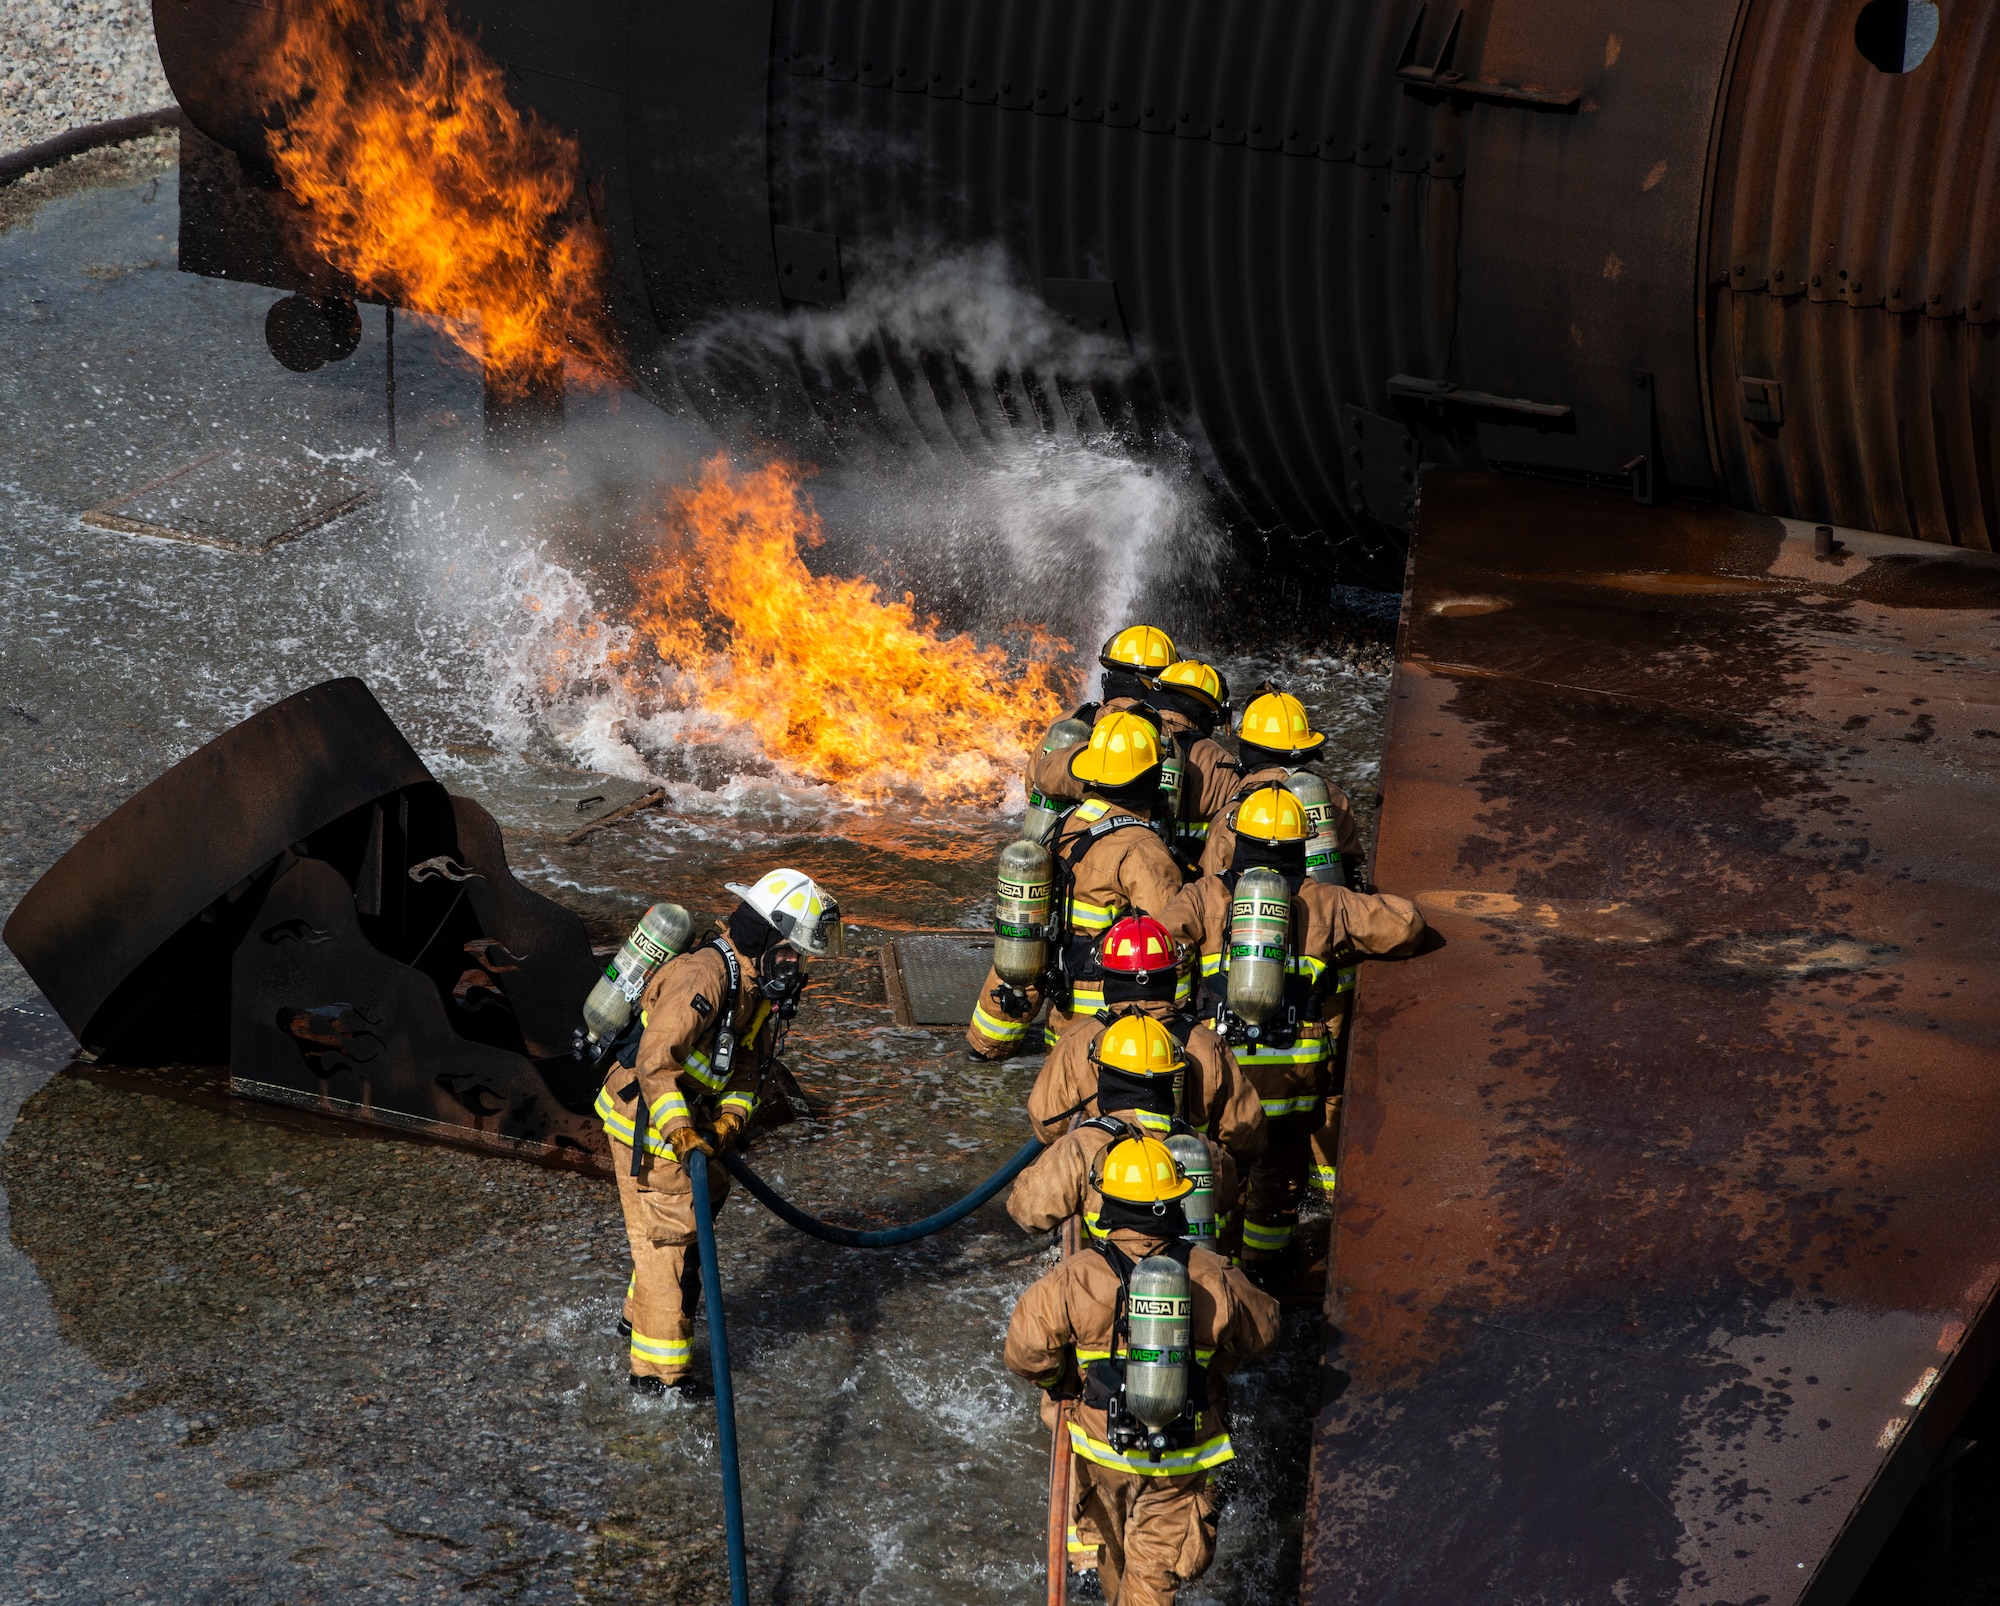 U.S. Air National Guardsmen from Maine, Connecticut and New Hampshire Civil Engineer Squadrons extinguish a mock C-130 Hercules aircraft fire during a live fire training scenario at Shaw Air Force Base, S.C., March 19, 2019.